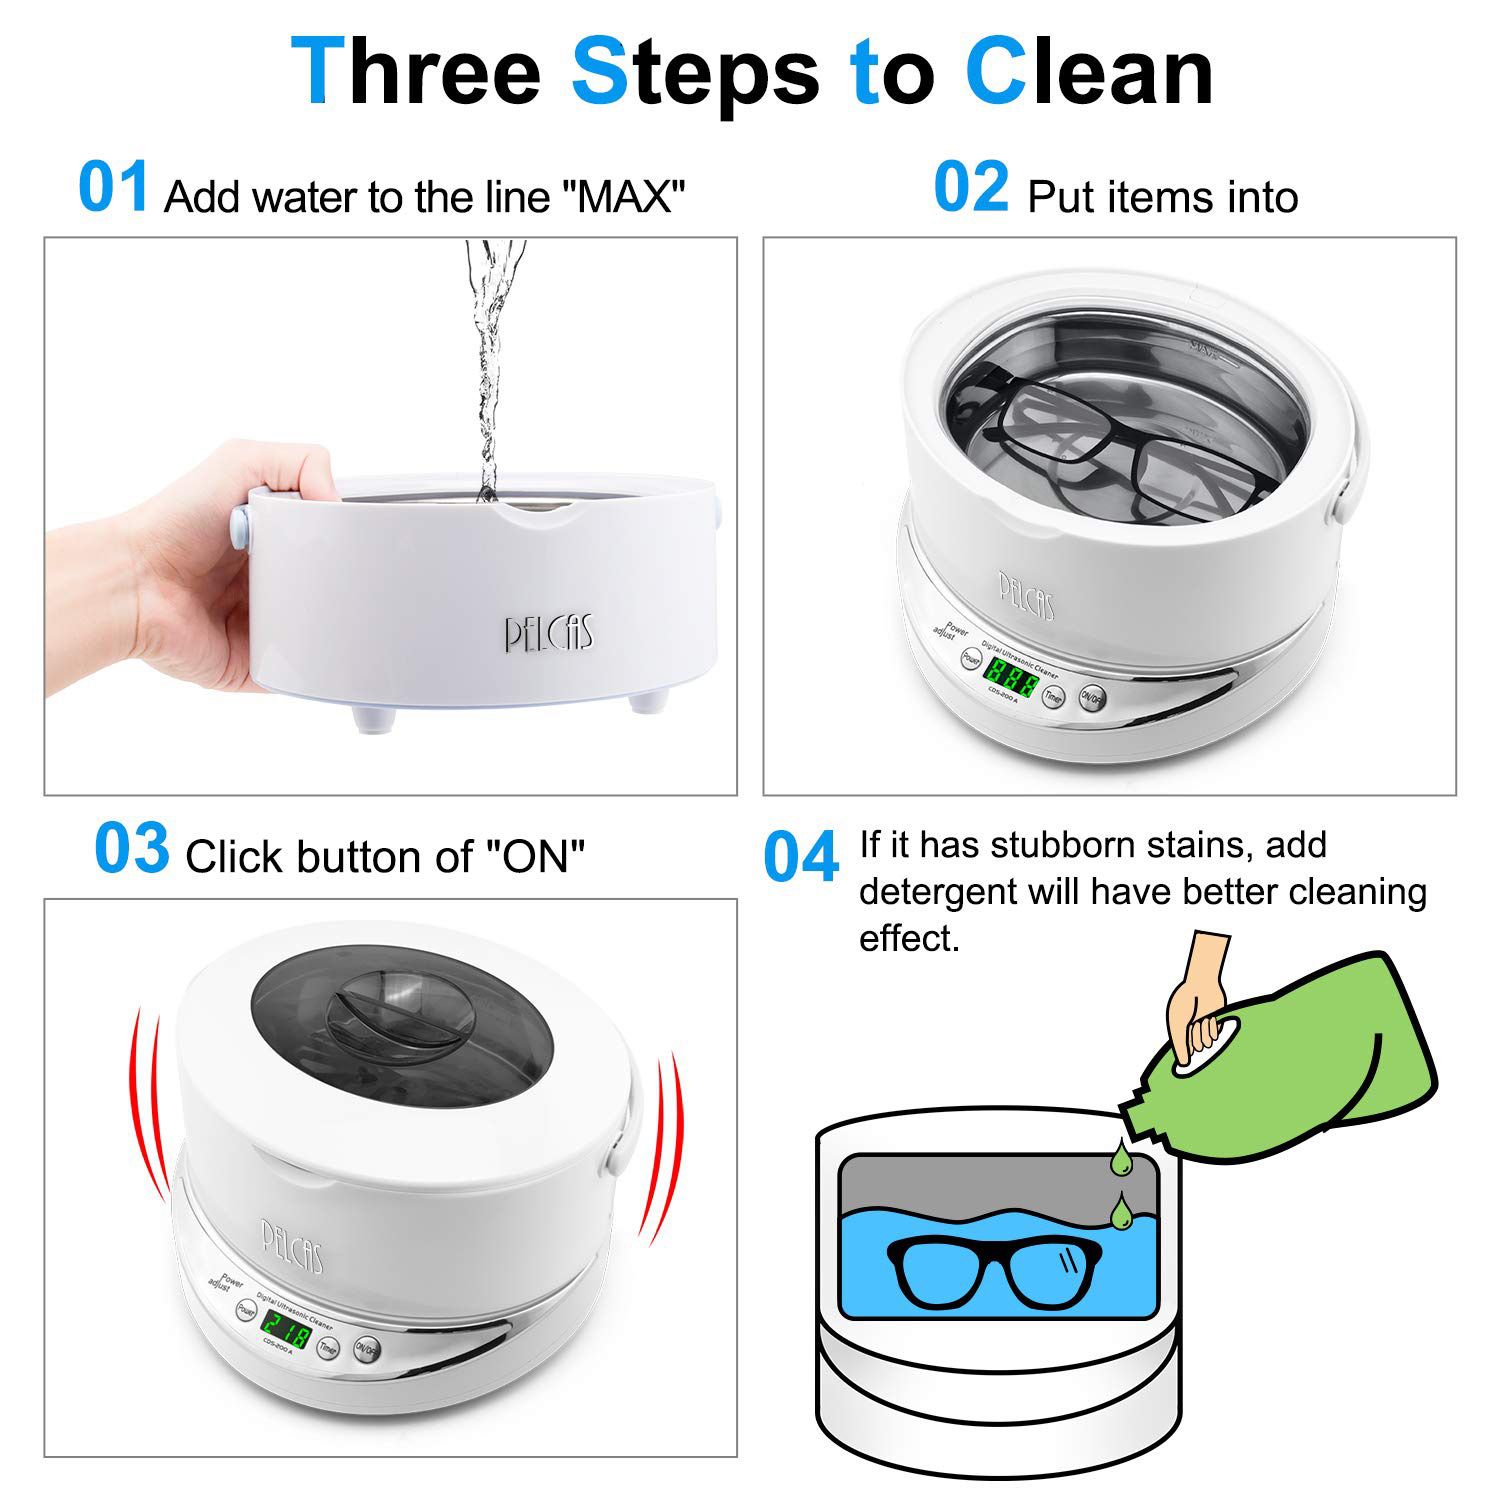 Ultrasonic Cleaner 25 Oz (750ml) Ultrasonic Jewelry Cleaner Machine with Detachable Tank 42000HZ Jewelry Cleaner with 5 Digital Timer Watch for Jewelr